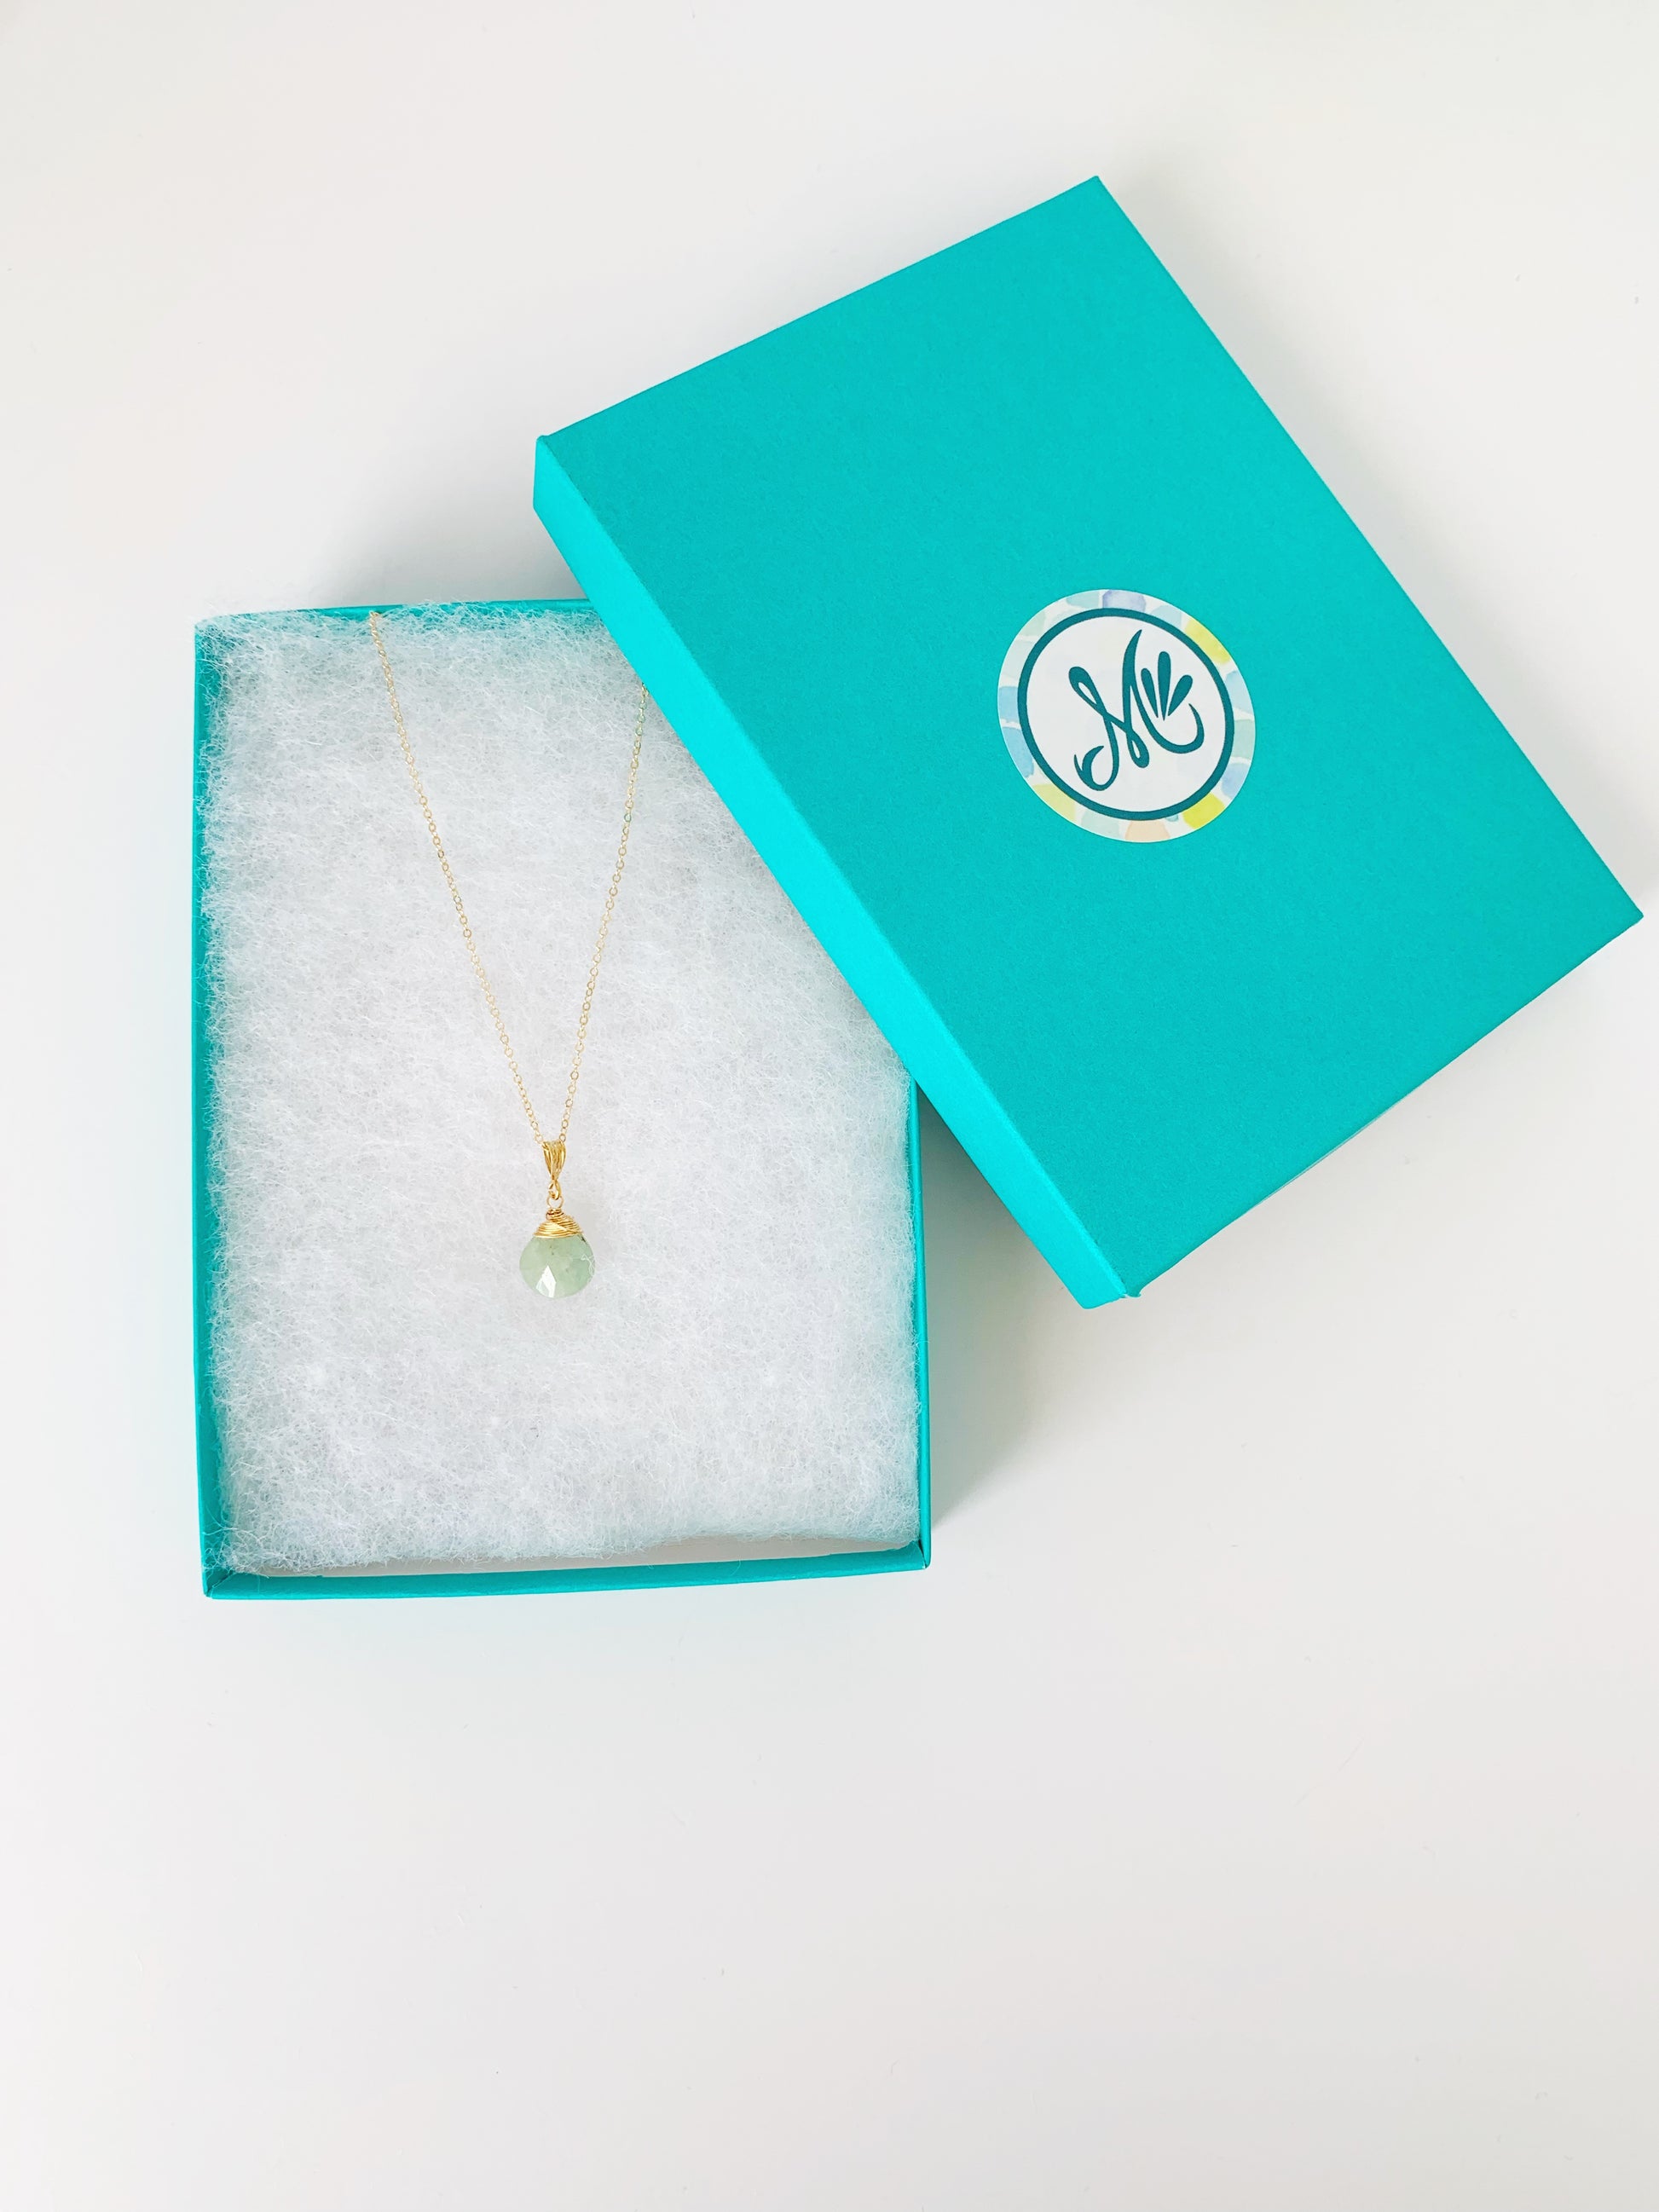 Raindrop necklace in 14k gold filled with aquamarine is pictured here in a teal gift box on a white surface